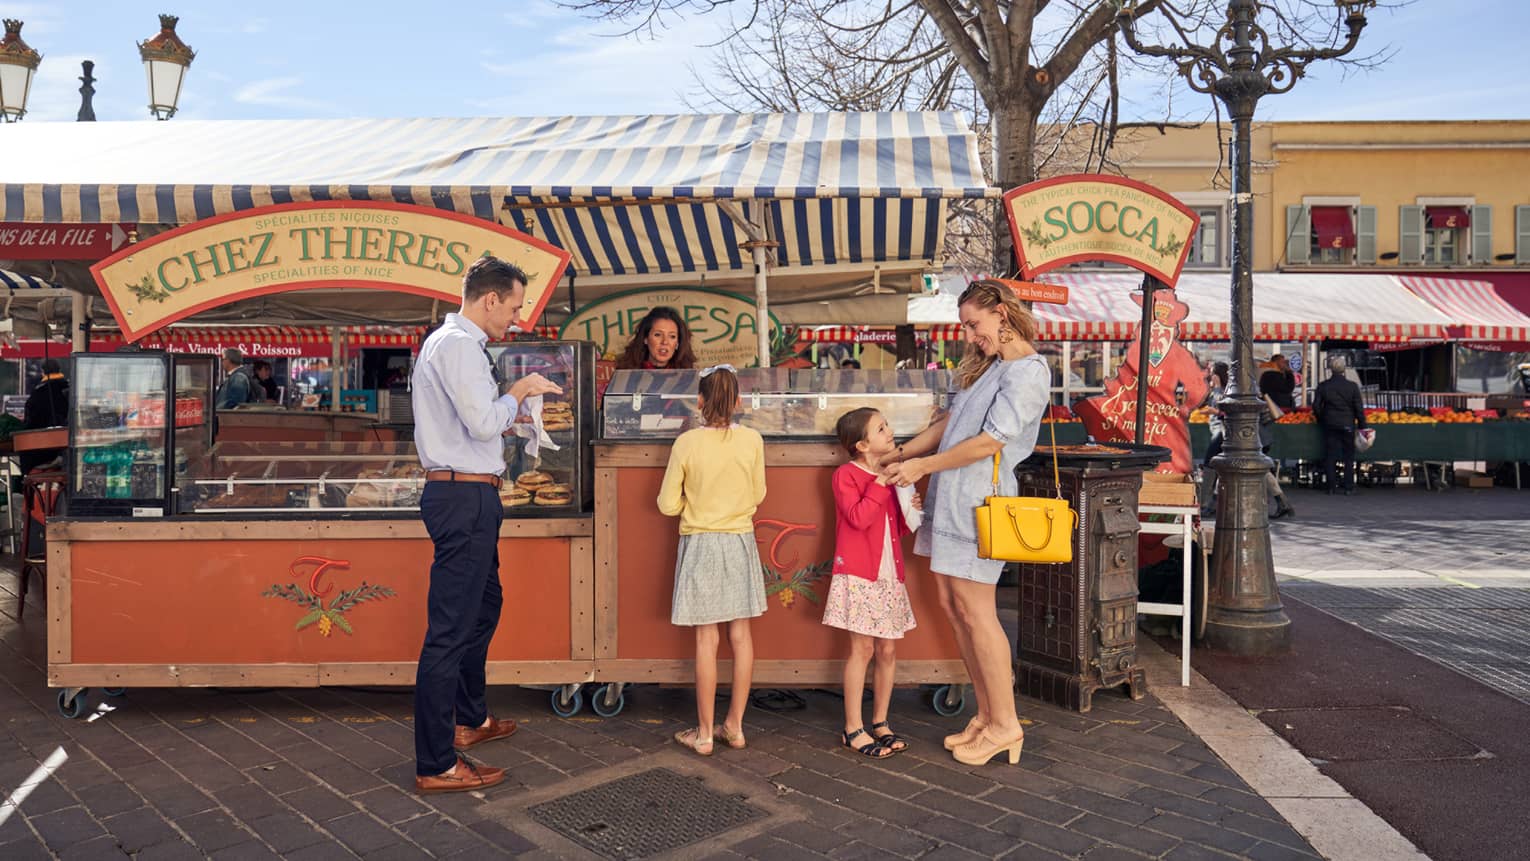 Man in blue shirt, black pants with two girls and woman in dresses at market farm stand)